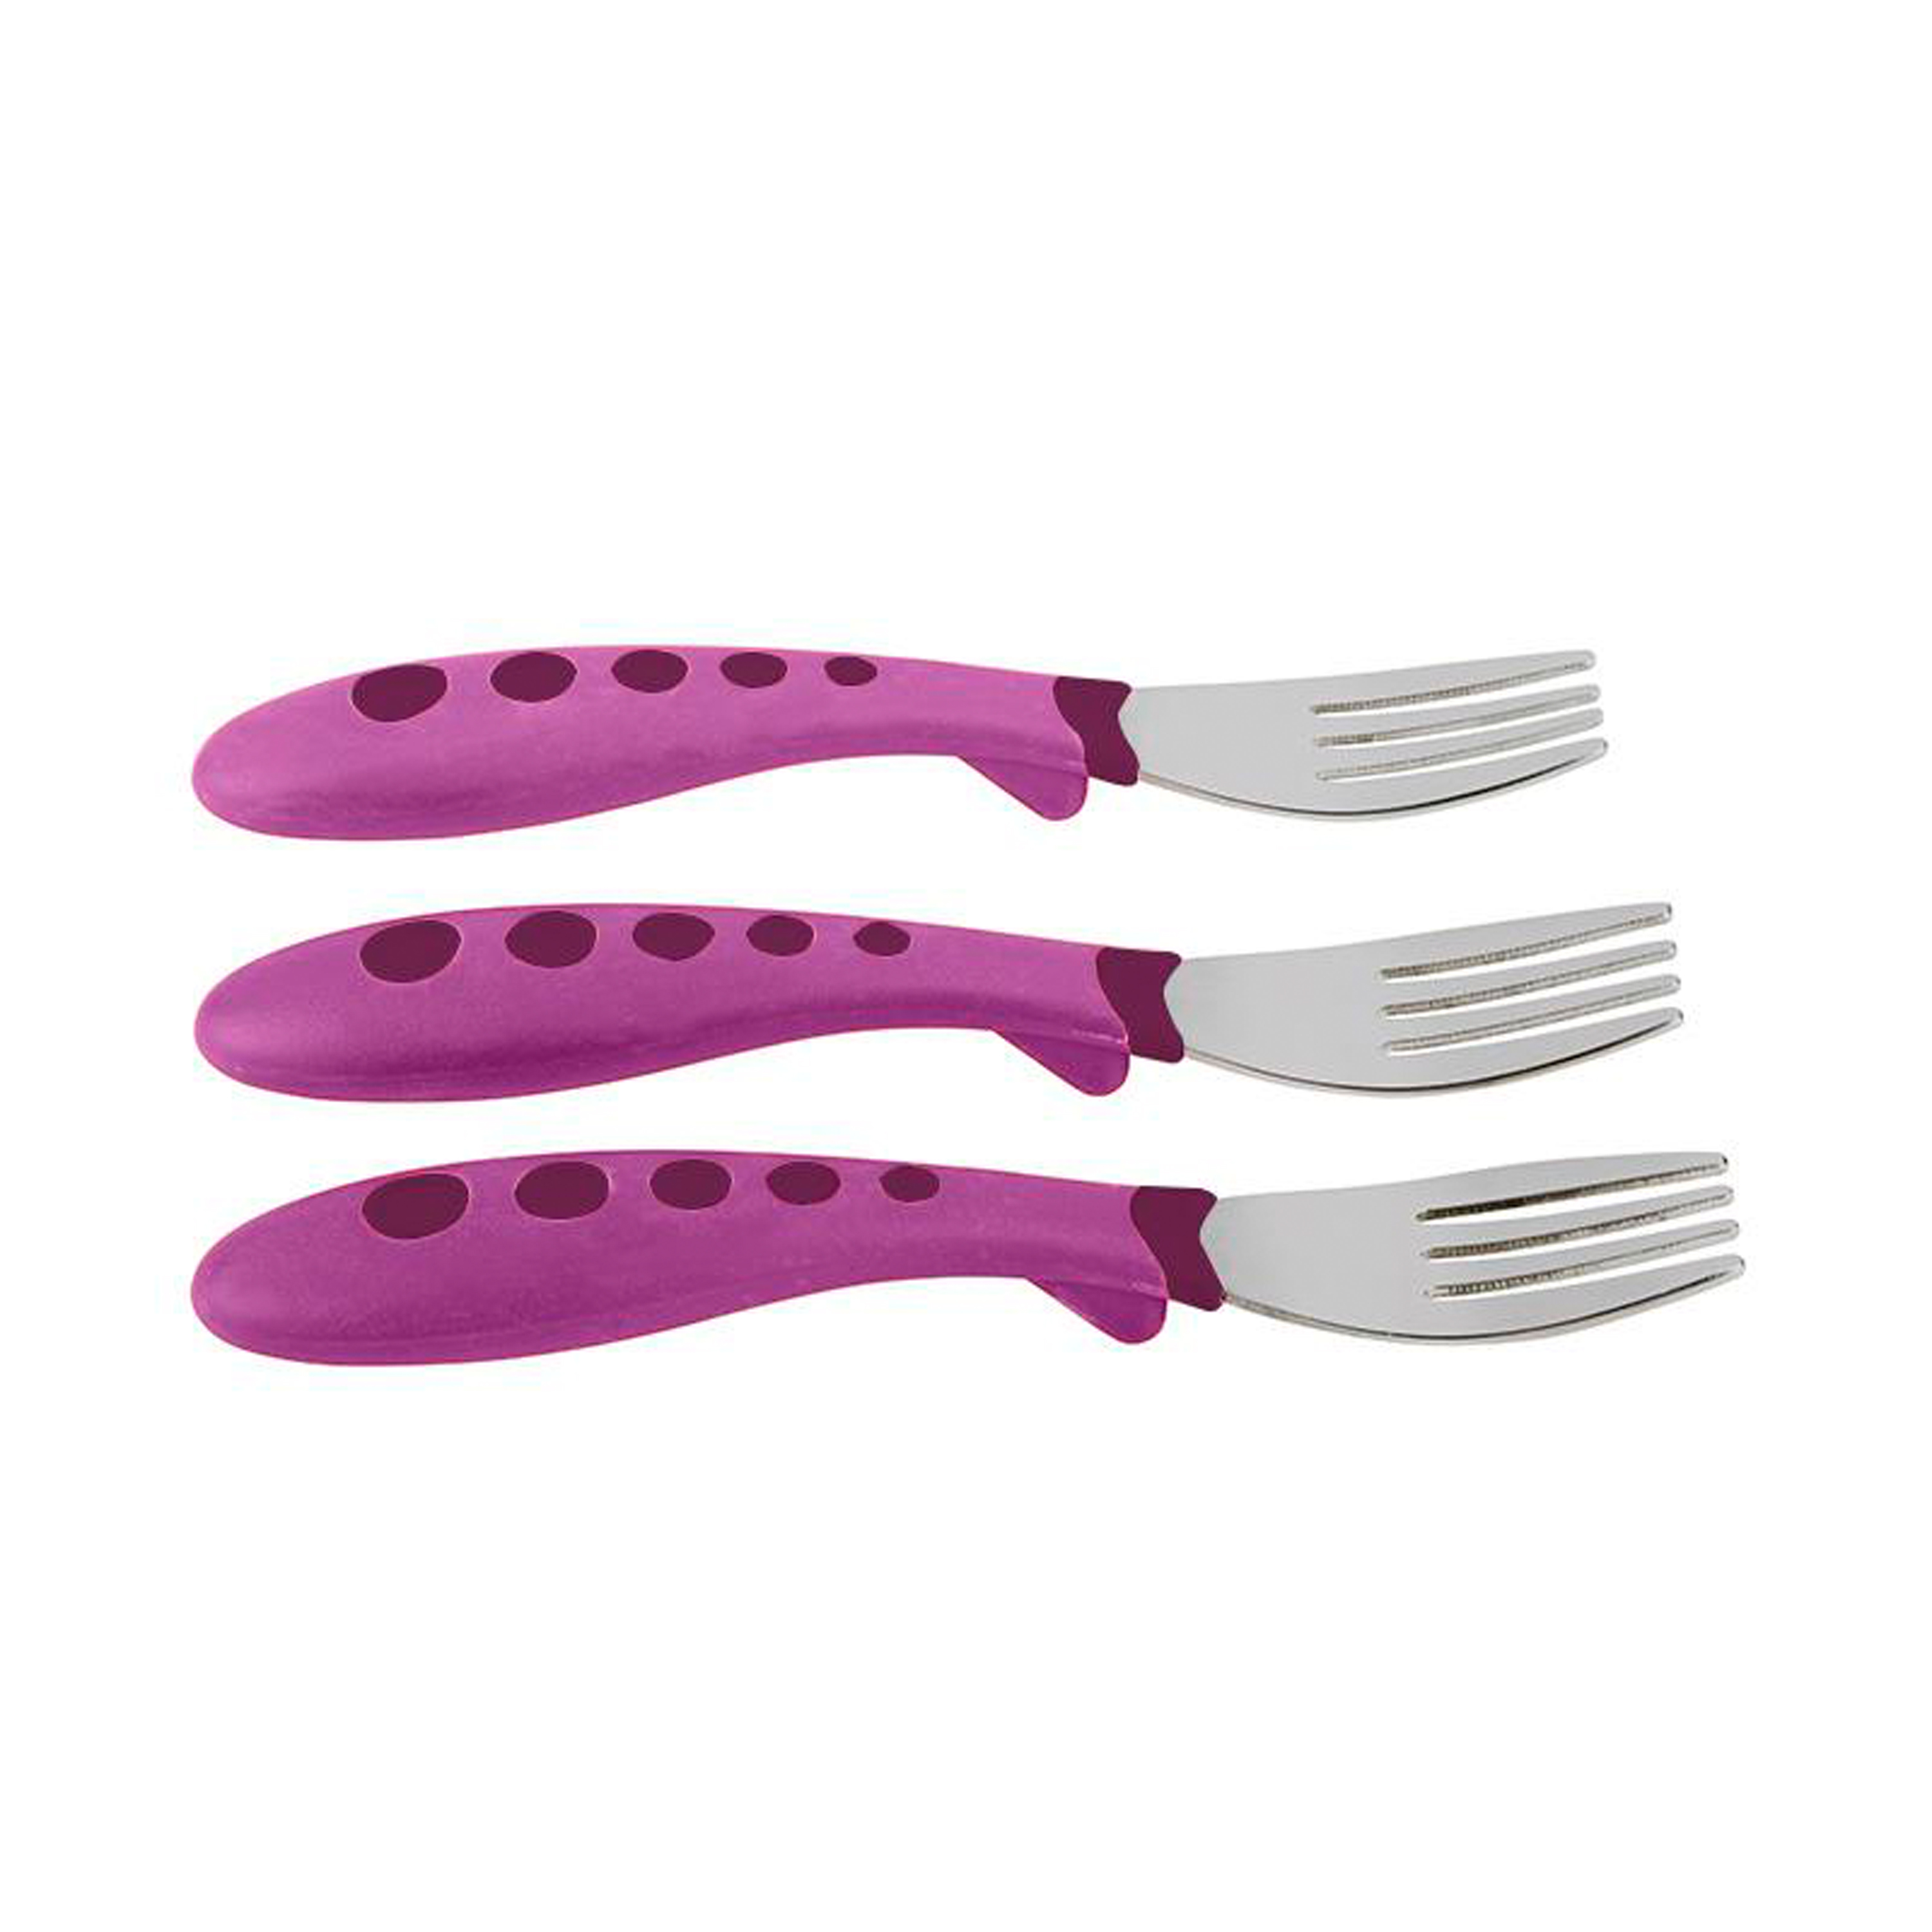 First Essentials by NUK Kiddy Cutlery Forks, 3-Pack, Green, Blue - image 5 of 6